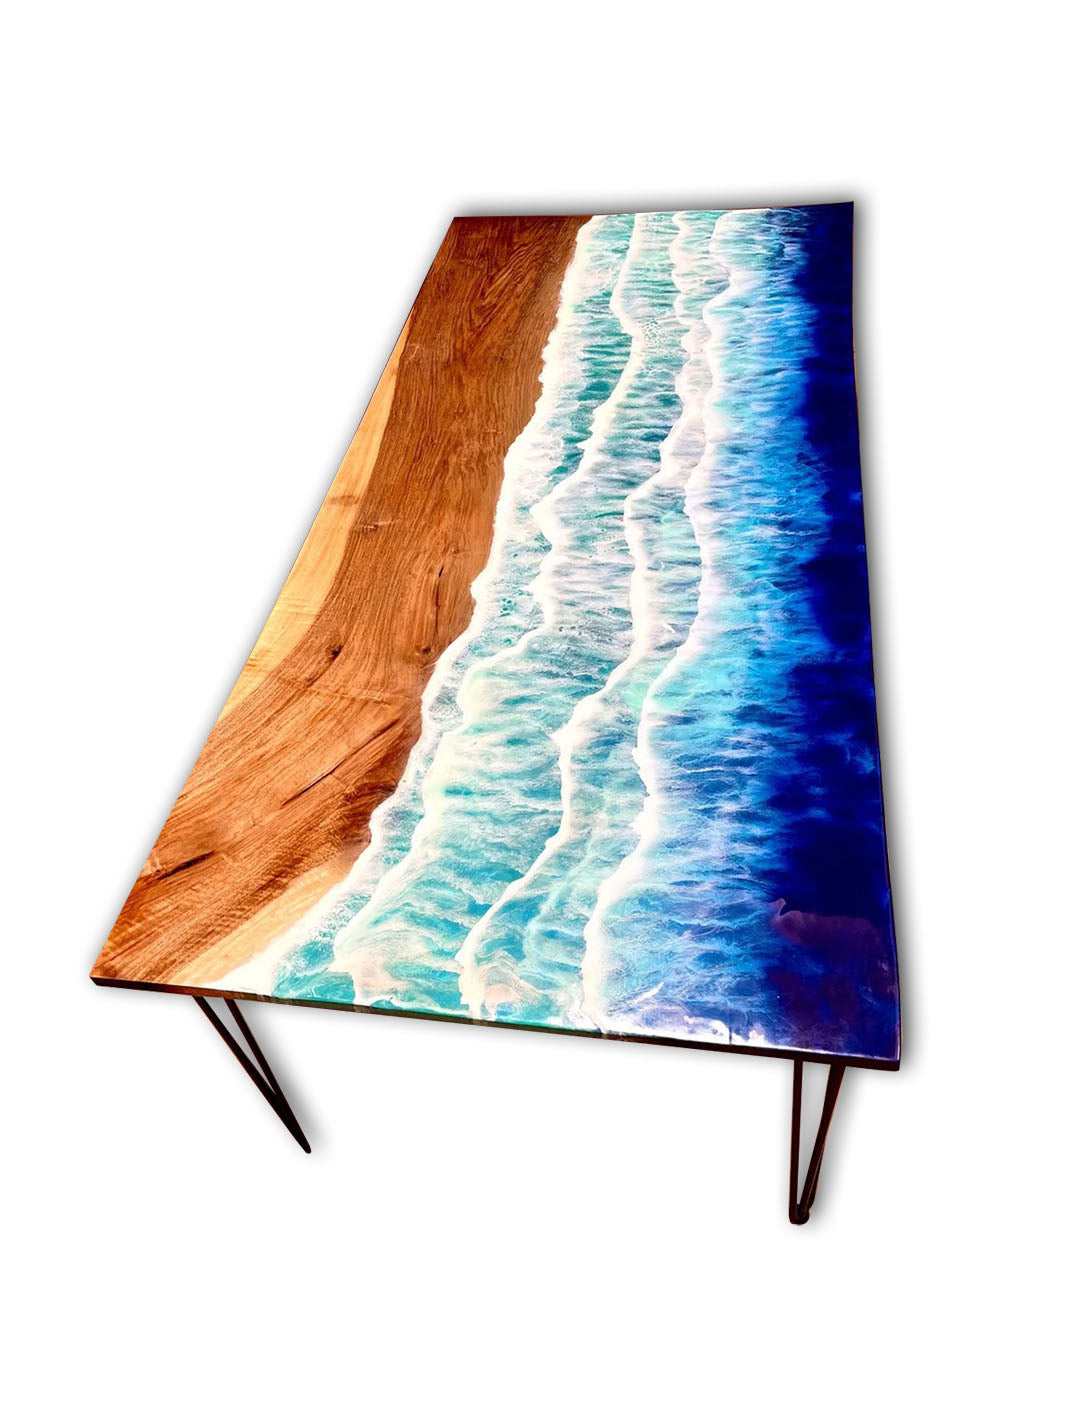 84"x42" Handcrafted Beach Inspired Elongated Epoxy Resin Dining Table Artsheedal Tables ART0140